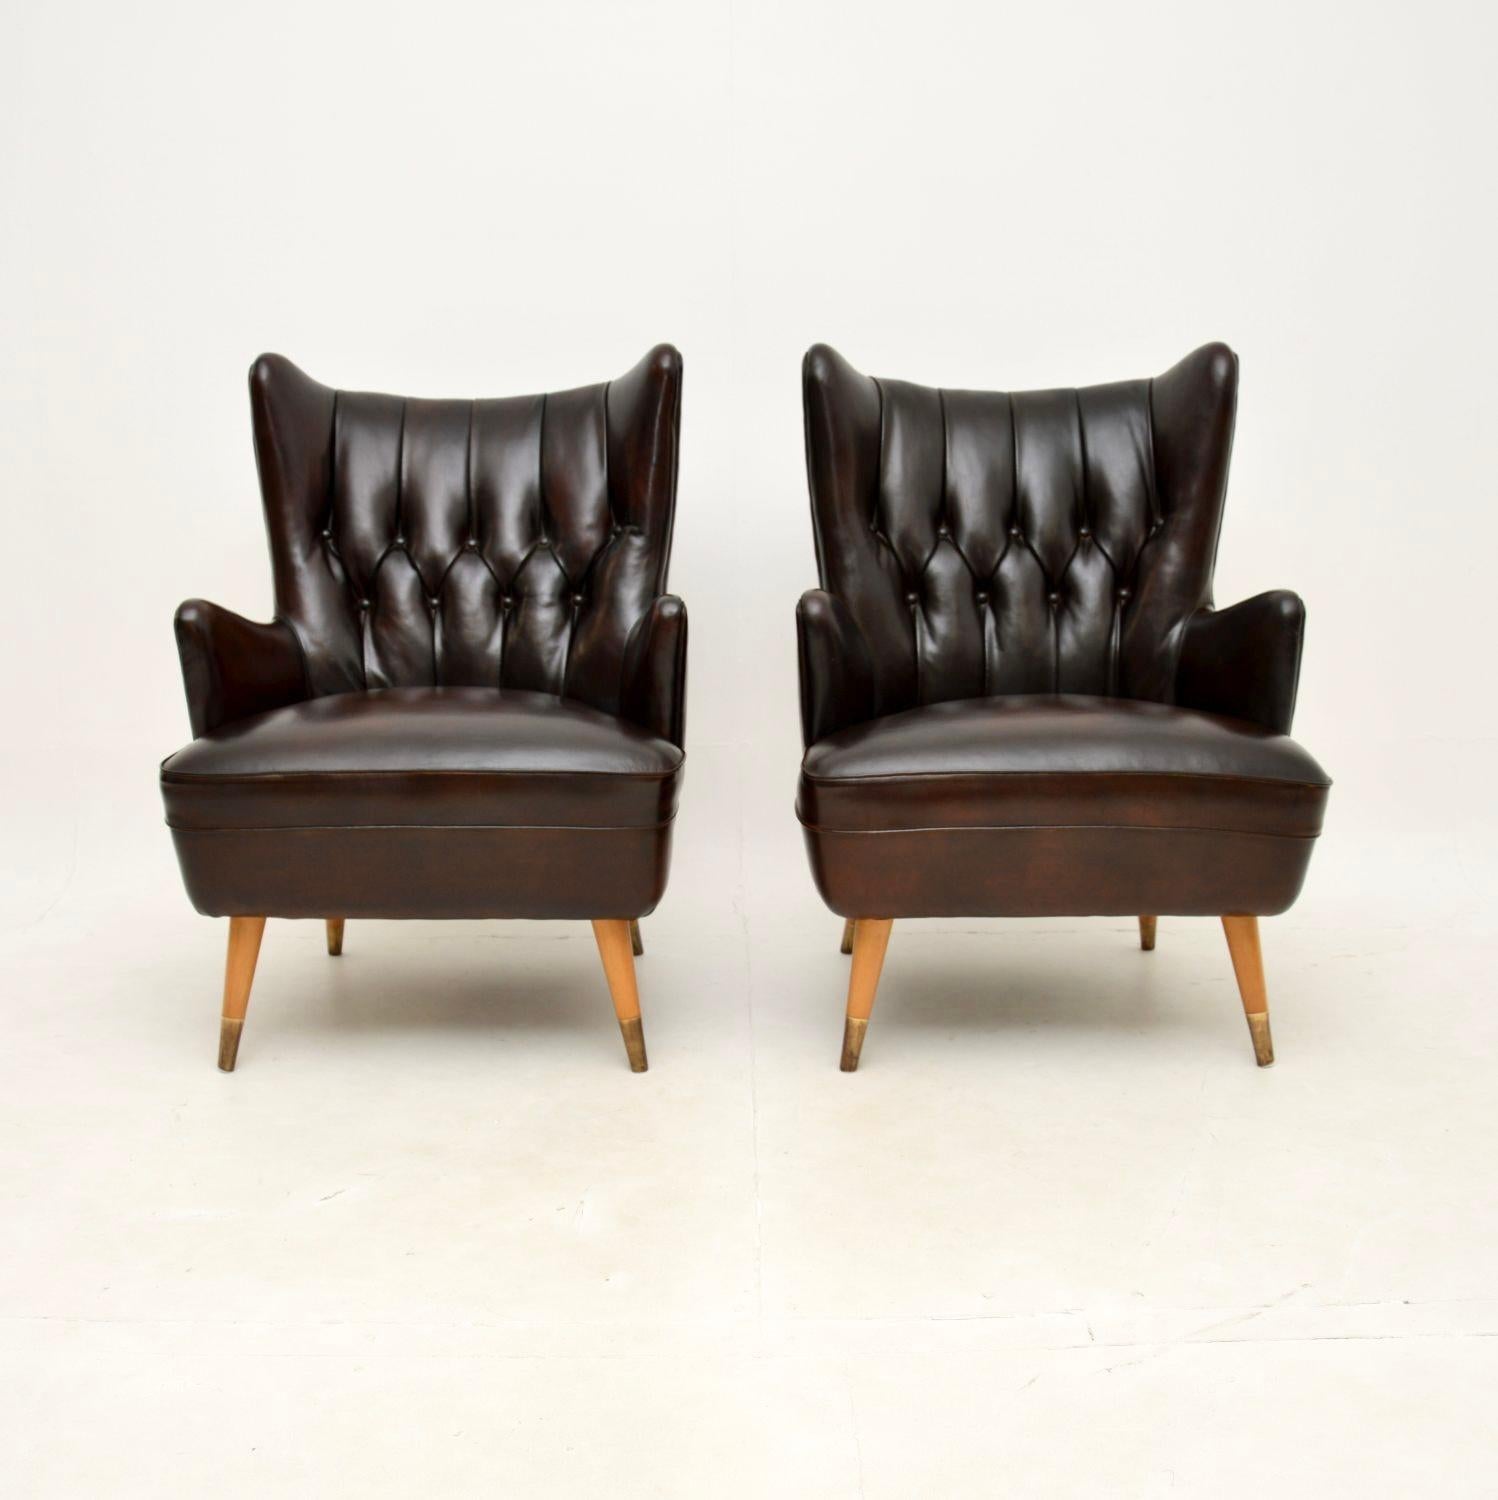 An incredibly stylish and well made pair of vintage Italian leather wing back armchairs. They were made in Italy, they date from the 1960’s.

The quality is outstanding, they are a great size, not too imposing yet also generous and extremely